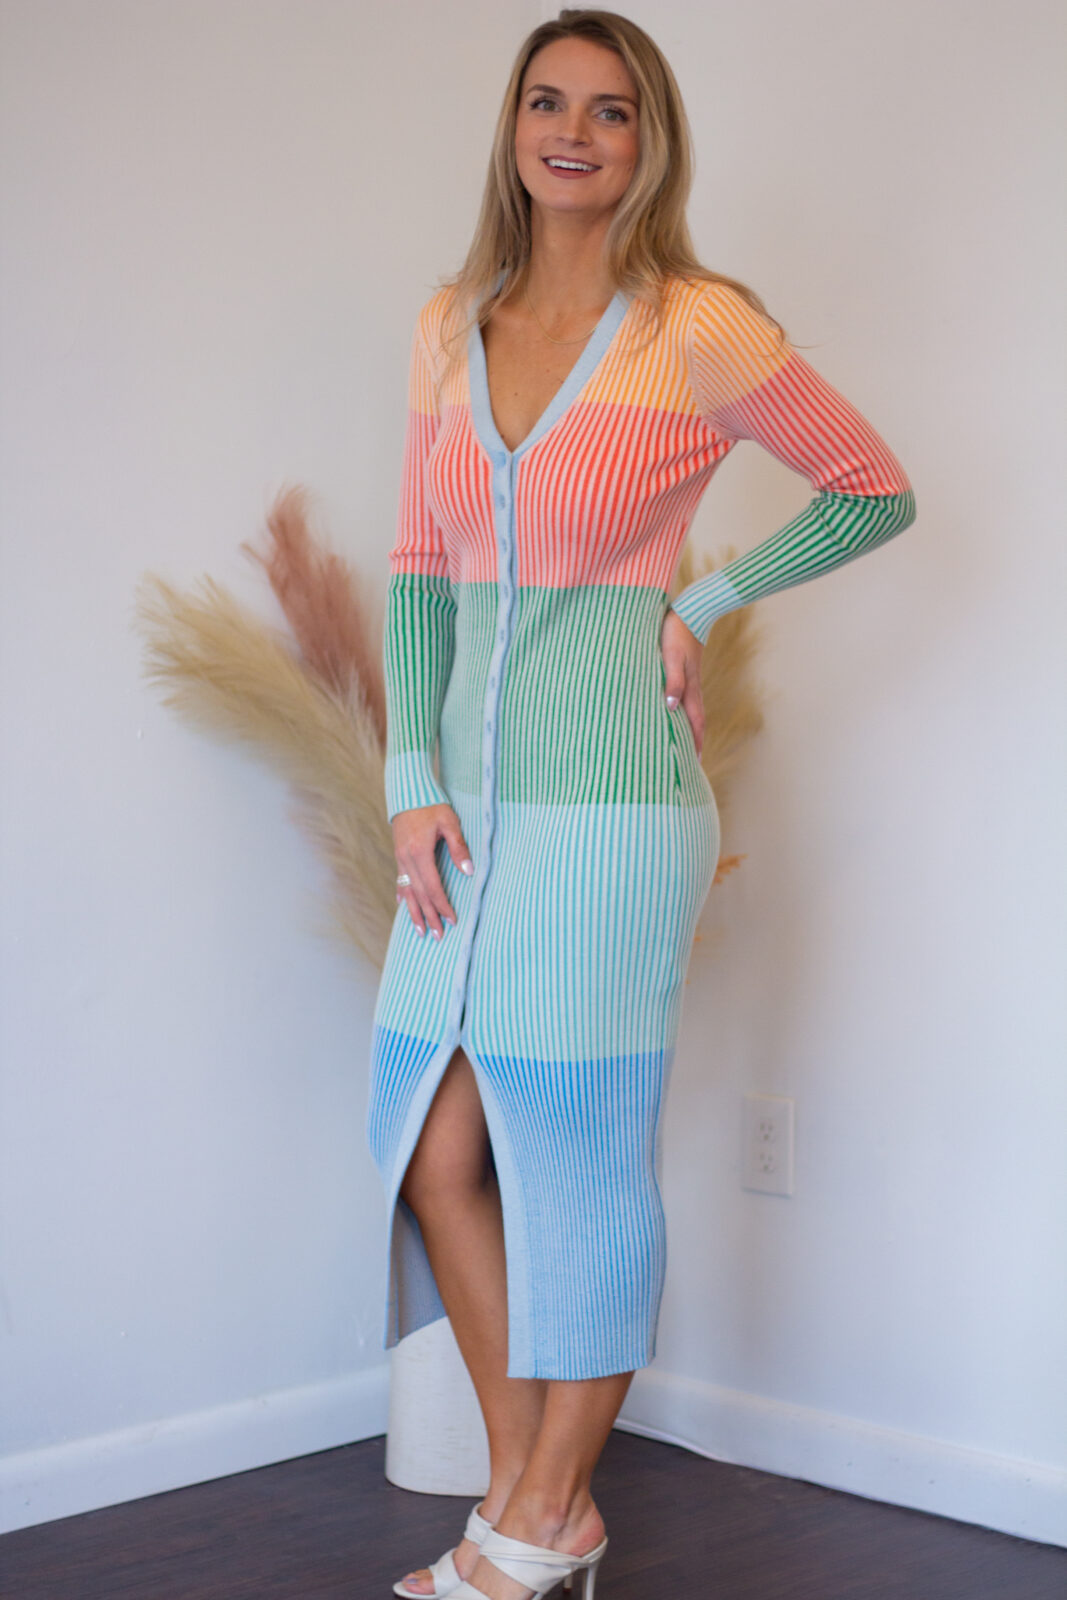 colorful dress showing Spring outfits trends in Atlanta